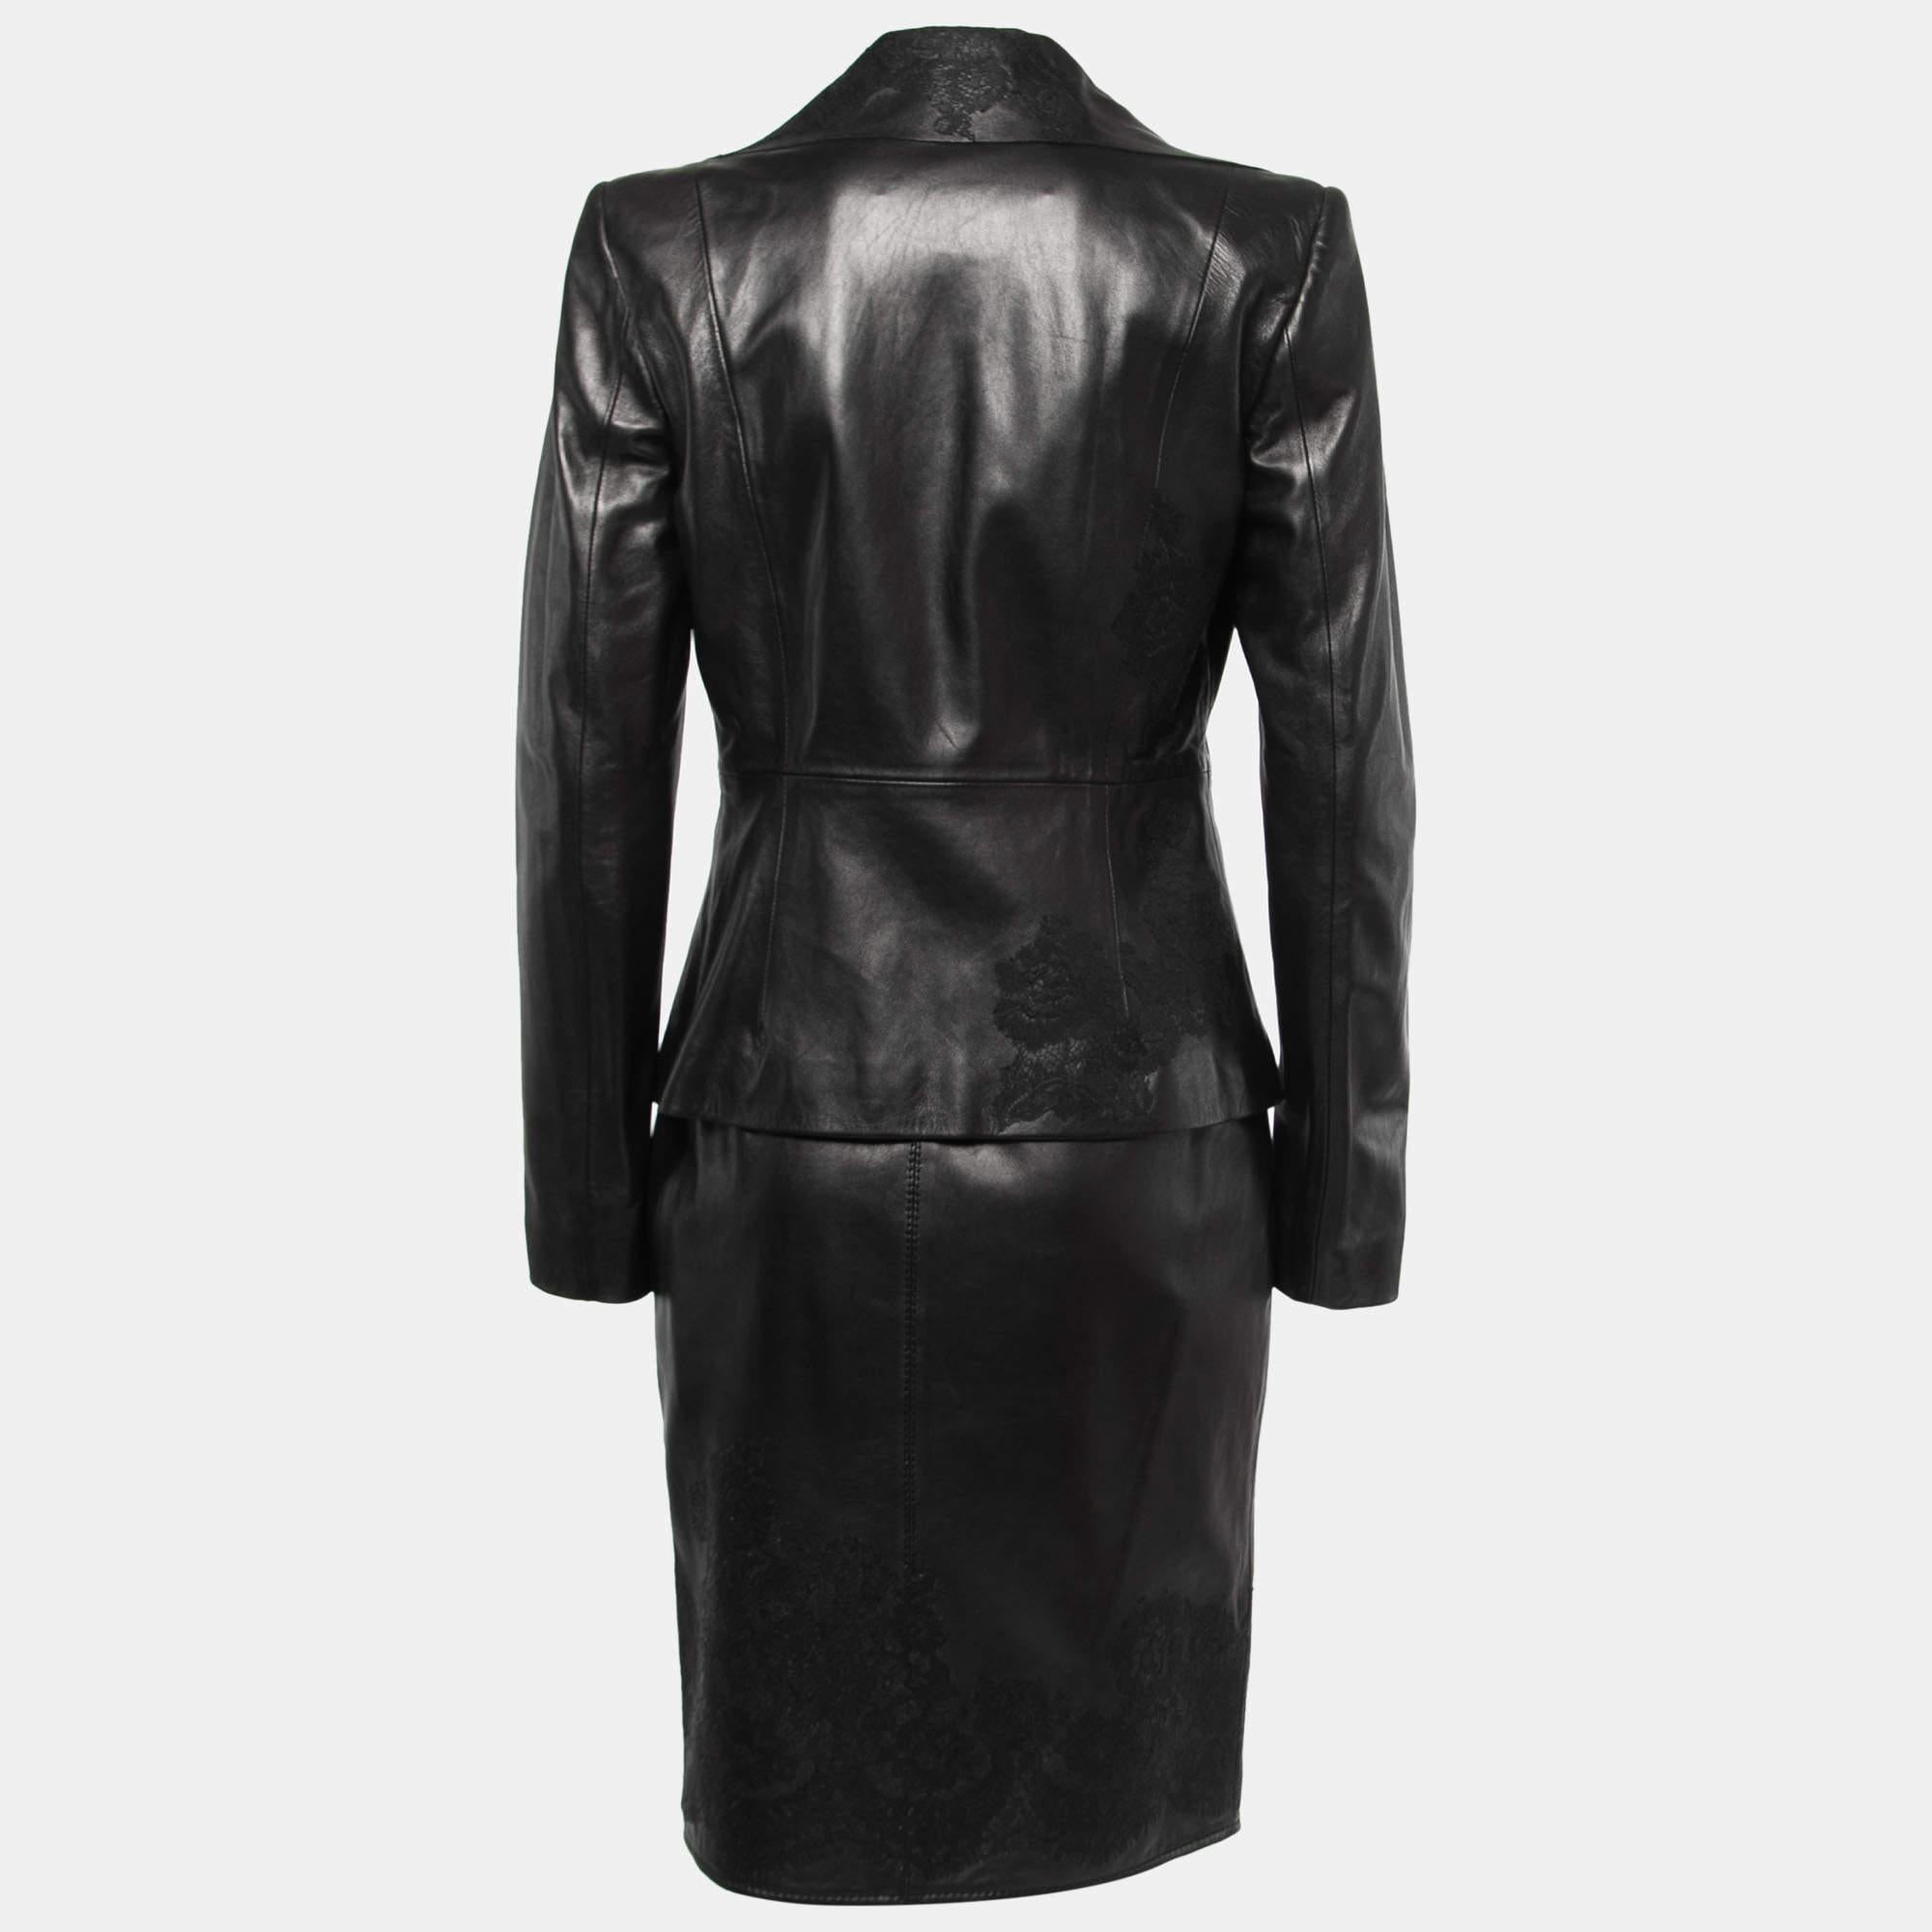 The Valentino Black Leather Lace Trimmed Jacket Skirt Set exudes timeless elegance. Crafted from luxurious black leather, the jacket features delicate lace trim detailing, adding a touch of femininity to the edgy design. The matching skirt completes